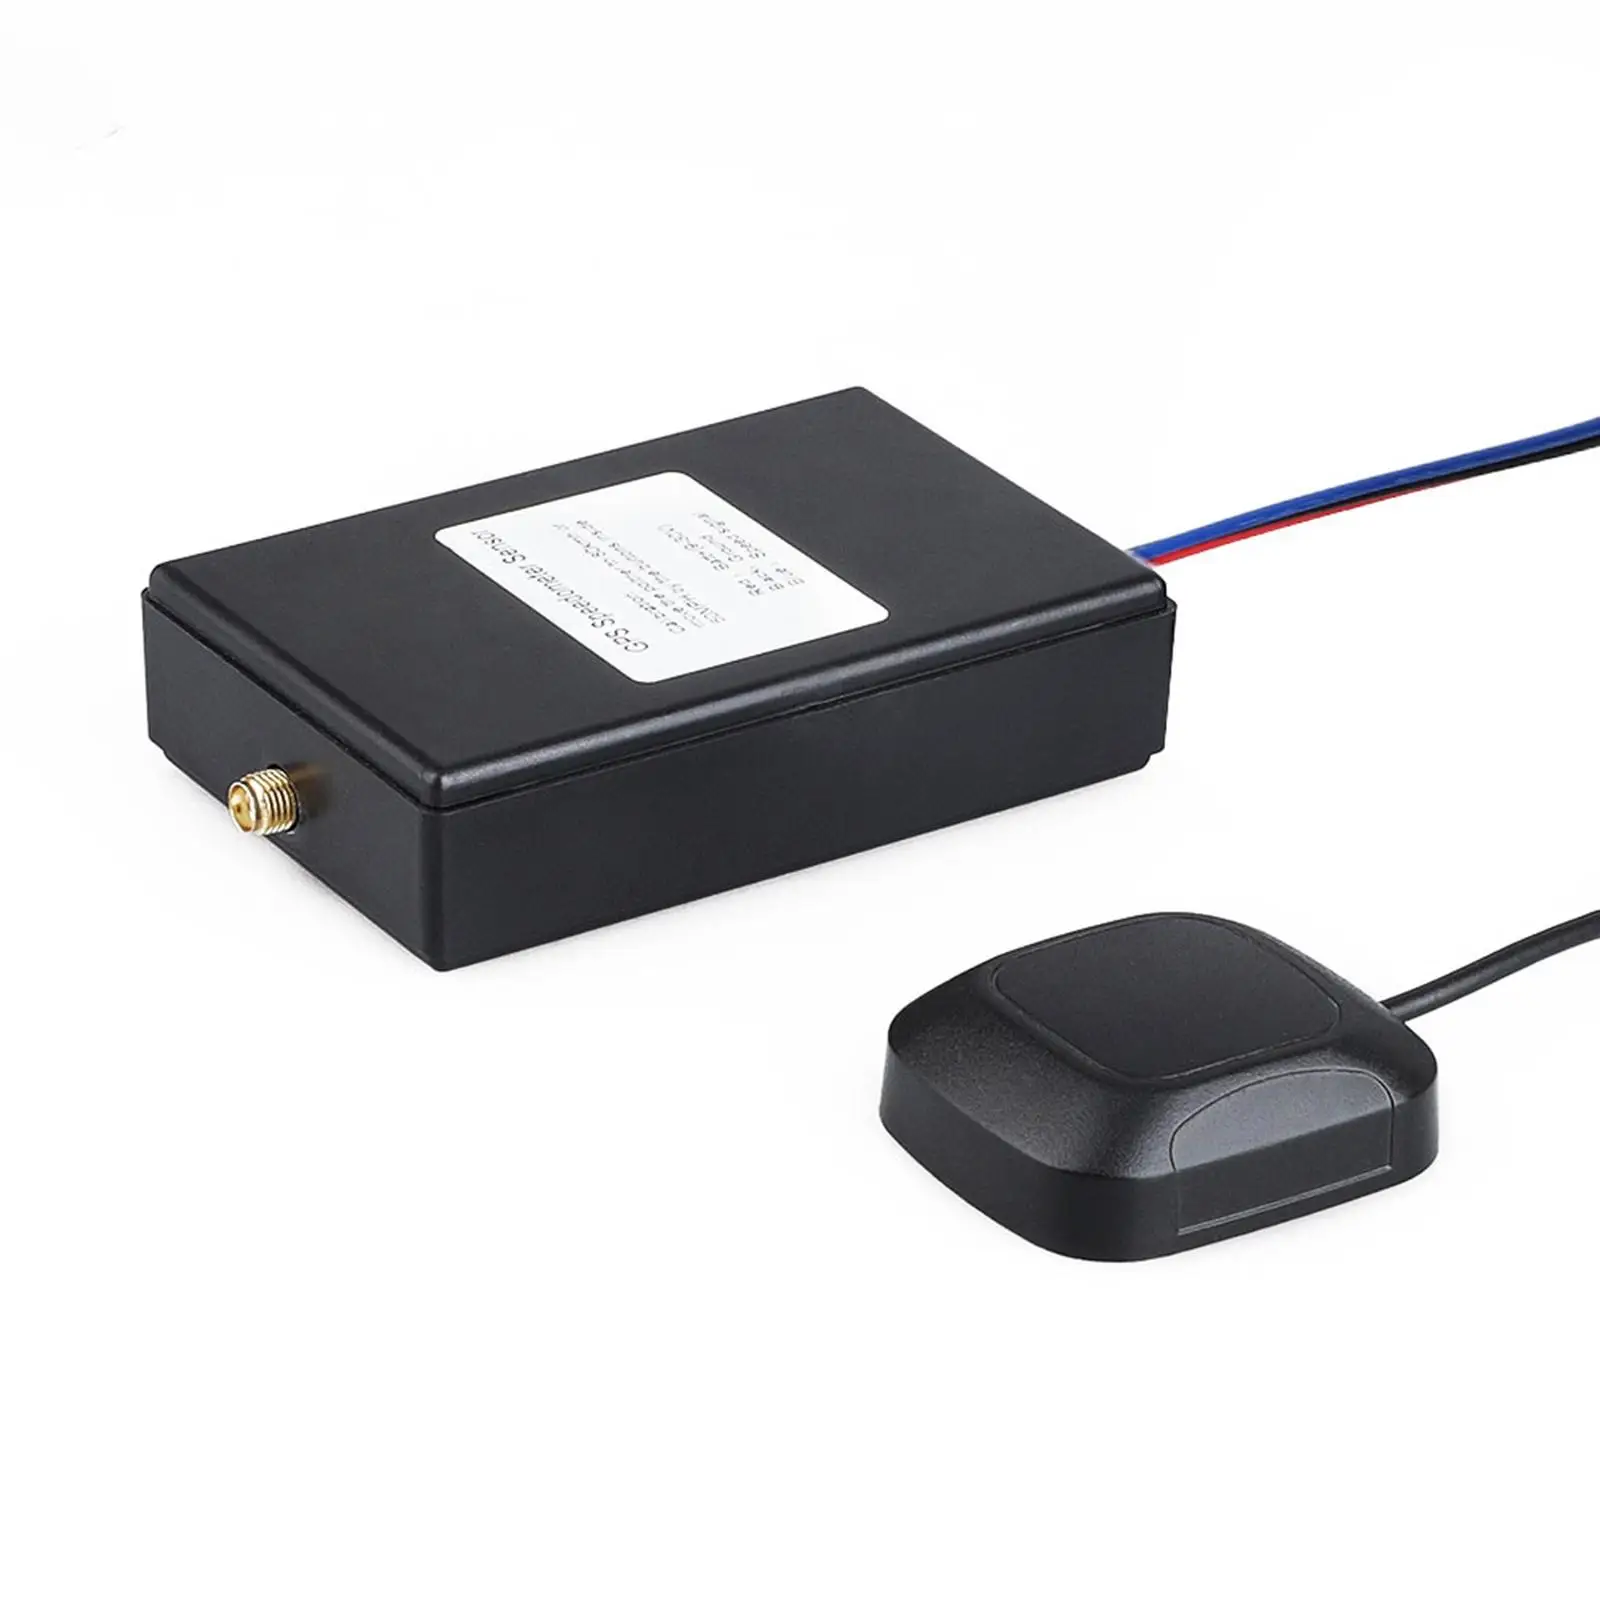 ometer Sensor  Sender for Vehicle Navigation Replacement Accessories